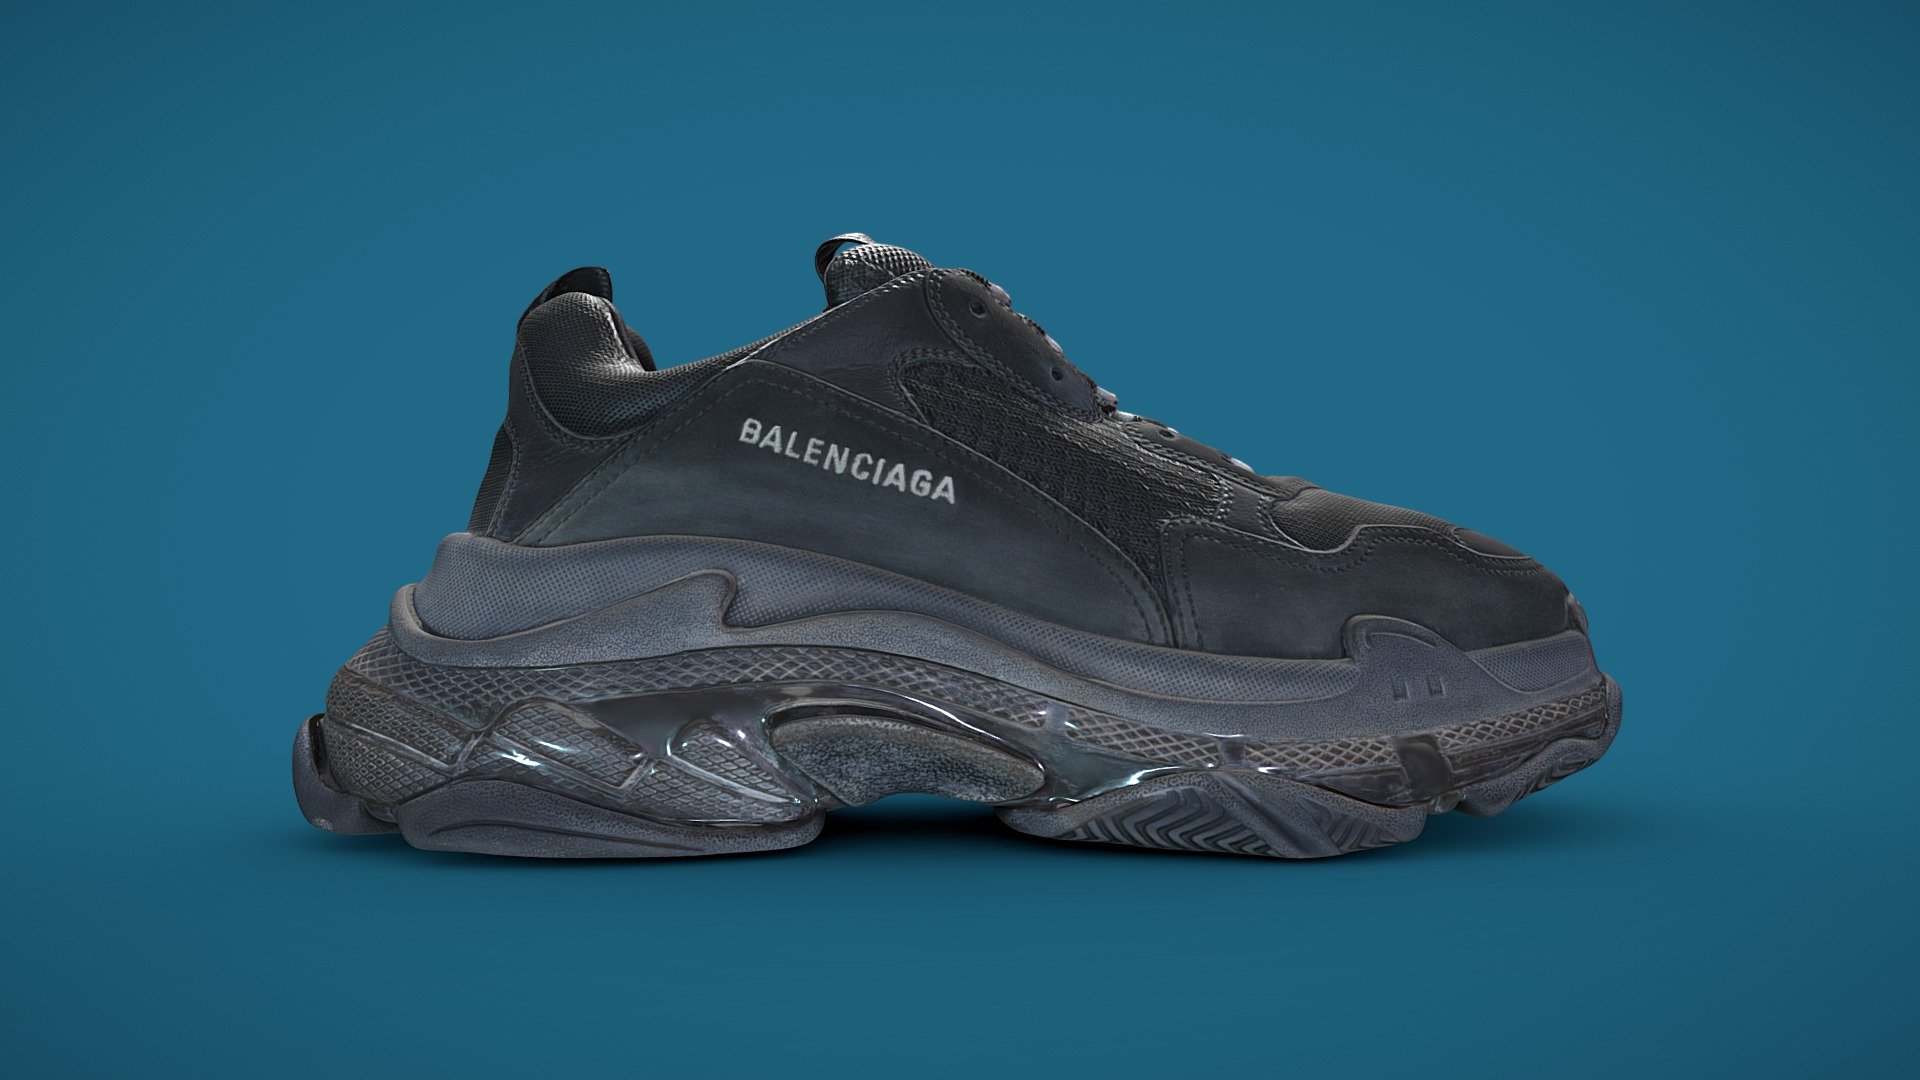 Photogrammetric 3D scan of Balenciaga's sneaker.

Capture done for an art project by Yilmaz Sen.
Unreleased result - https://www.instagram.com/p/B0Vxv03Agu_/ - Balenciaga Triple S Trainers - 3D model by Rigsters 3d model